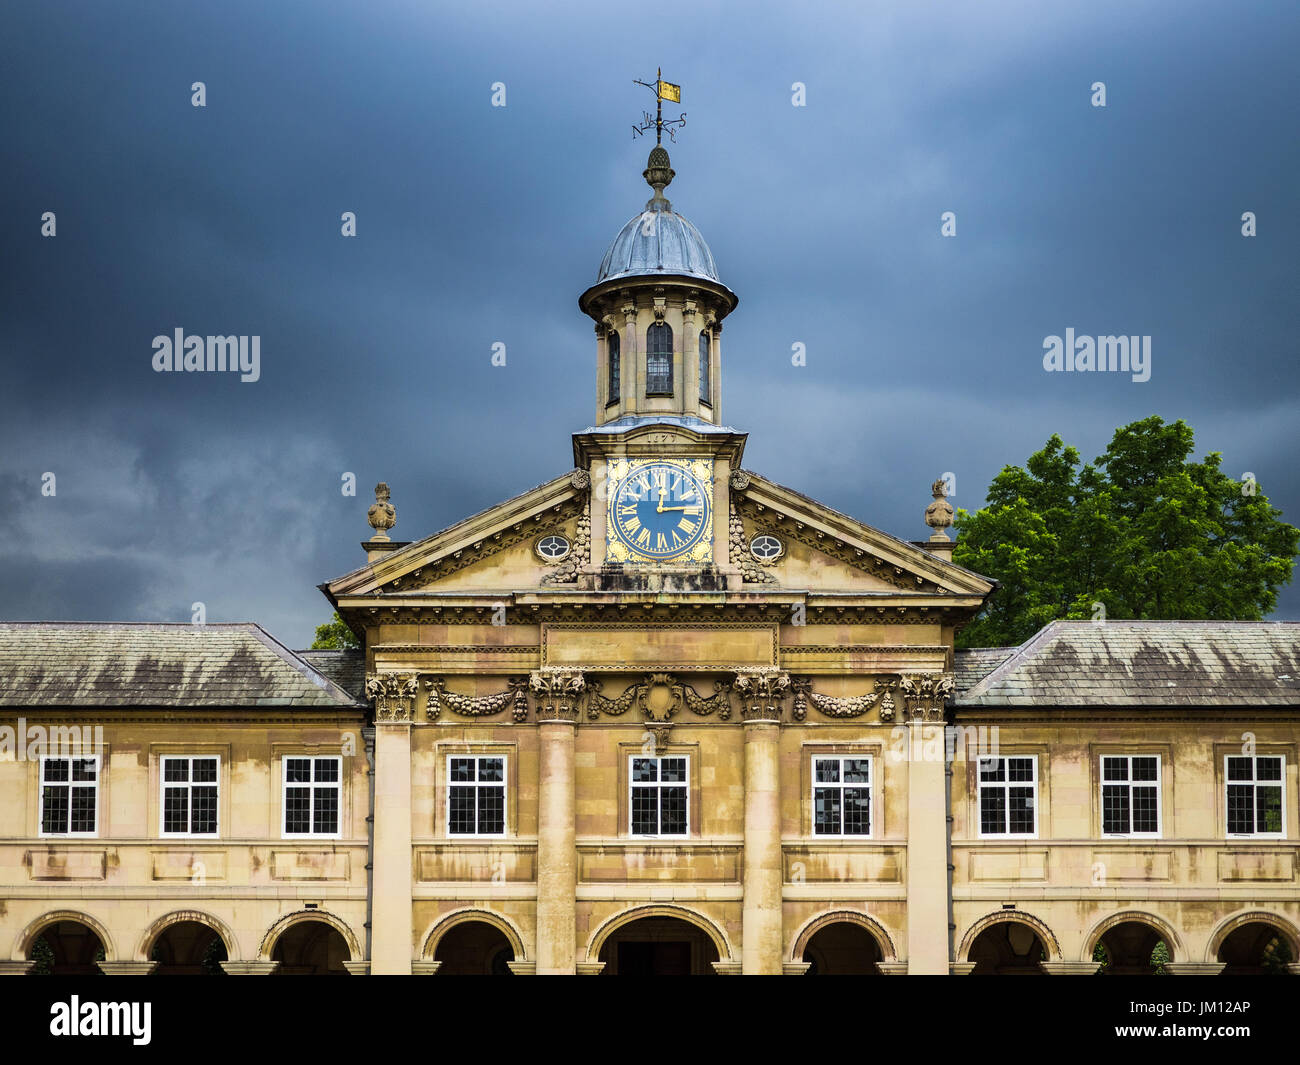 Cambridge - The Clocktower and Front Court at Emmanuel College, part of the University of Cambridge, UK. The college was founded in 1584. Arch: Wren. Stock Photo